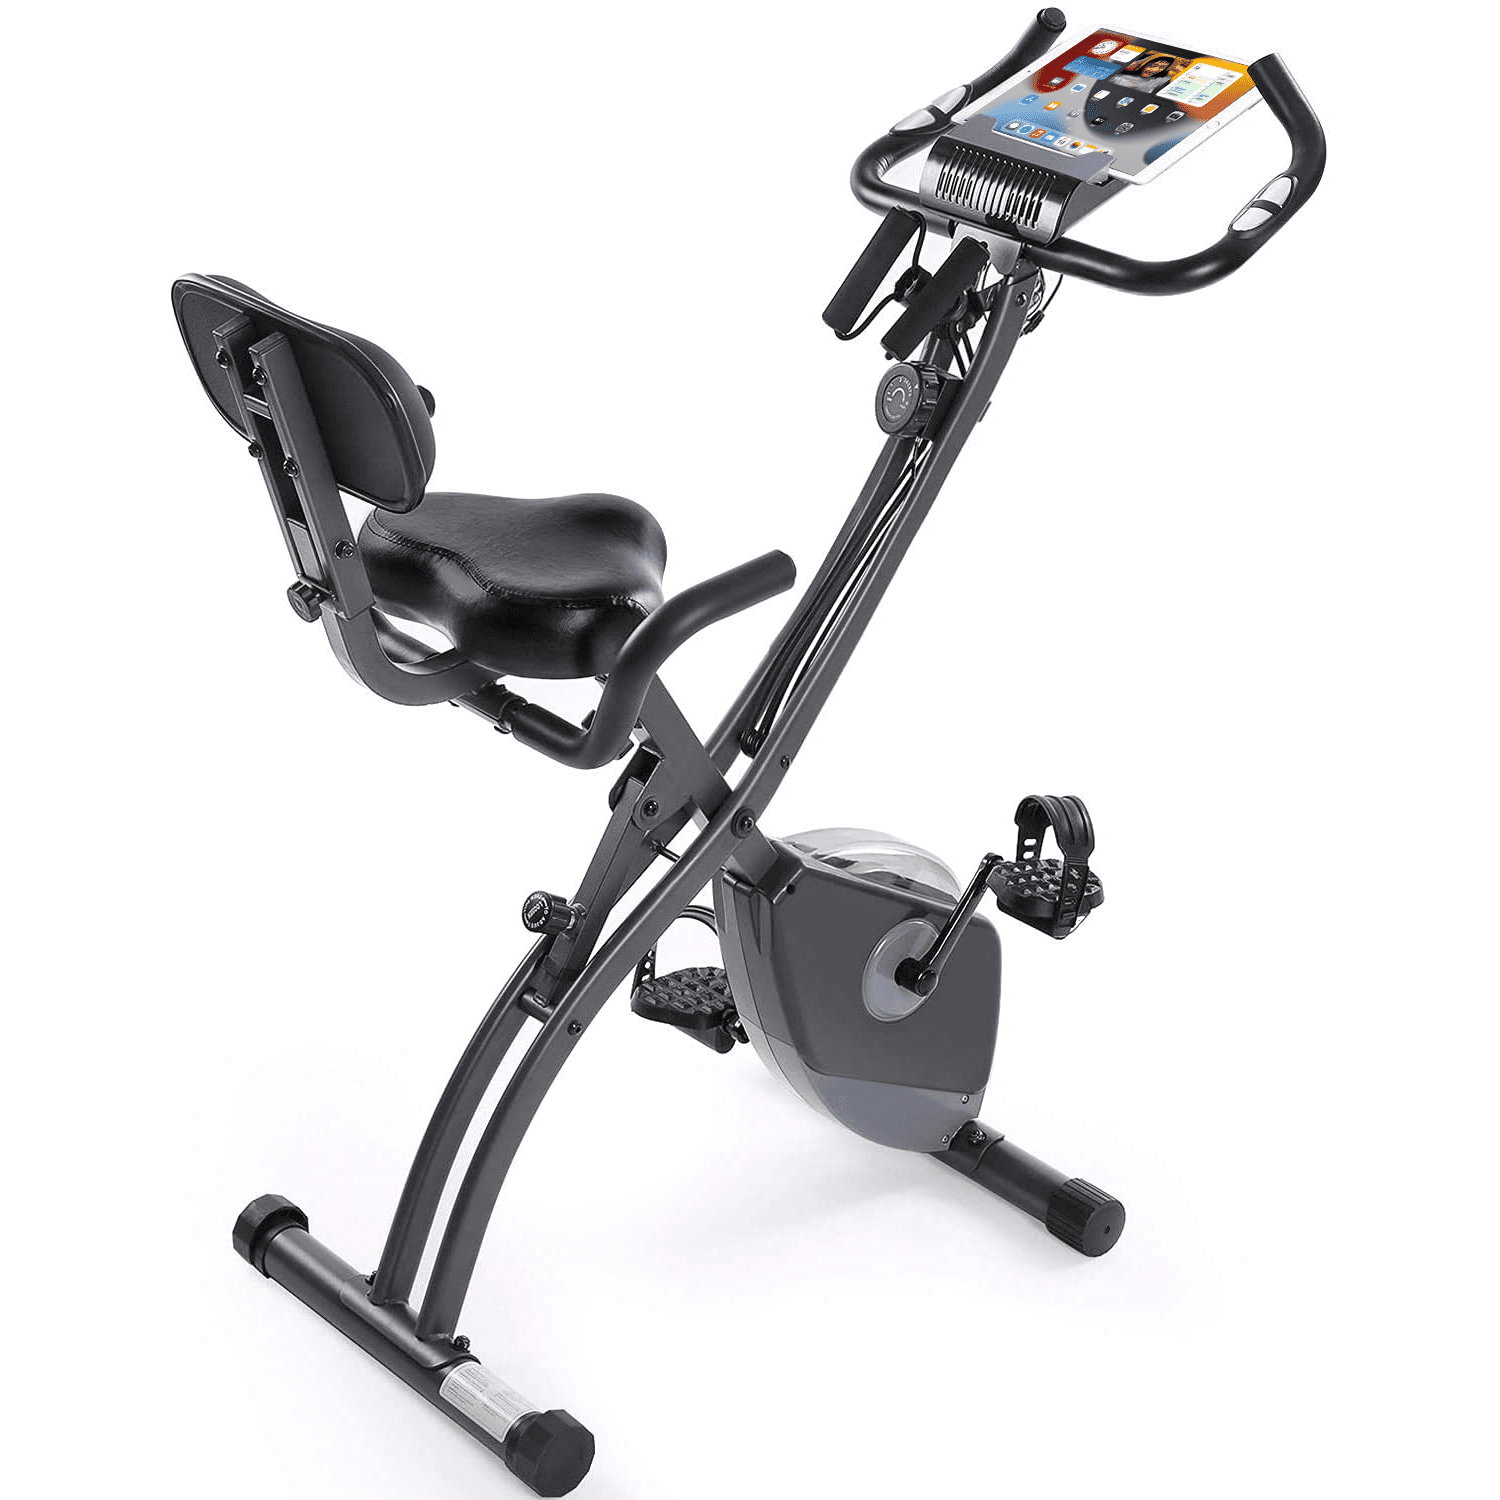 Recumbent Exercise Bike 8 Levels Monitor Resistance Bands Sport Full Body New 